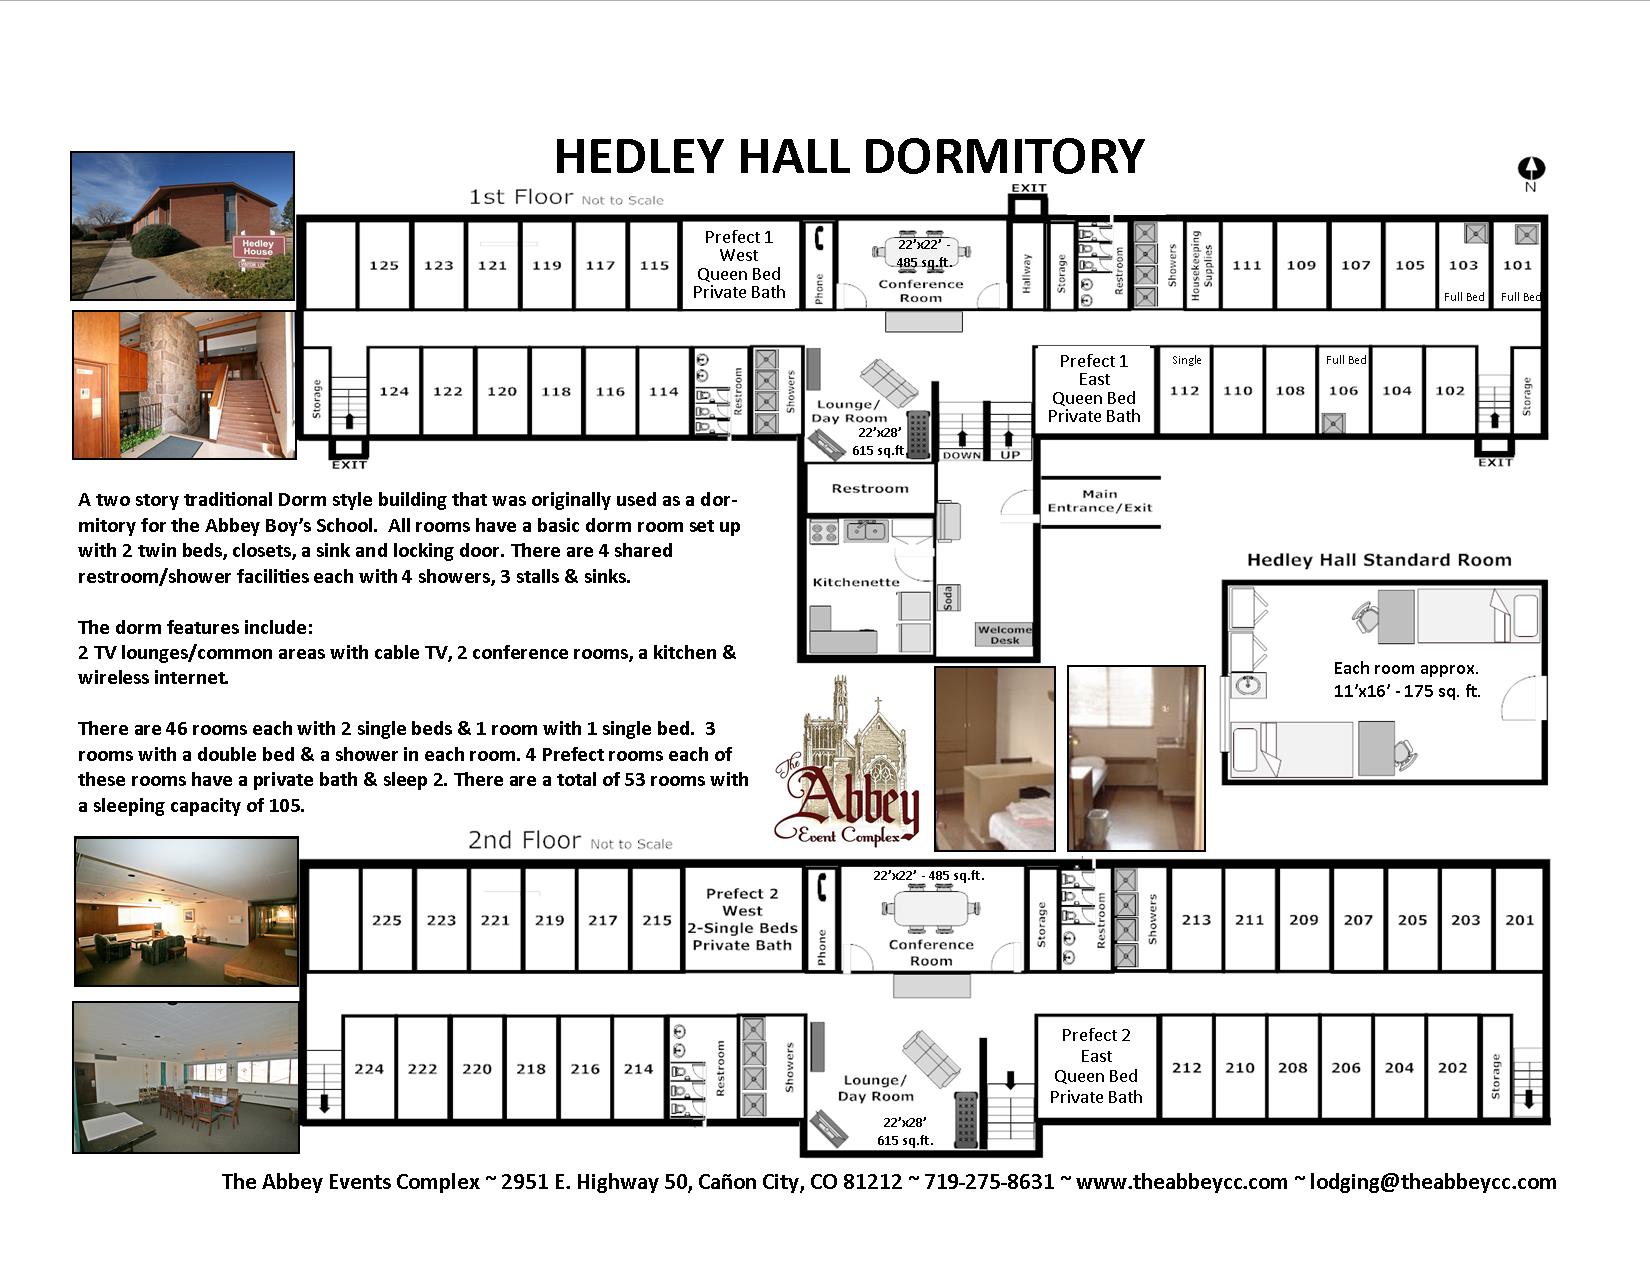 stay at hedley hall